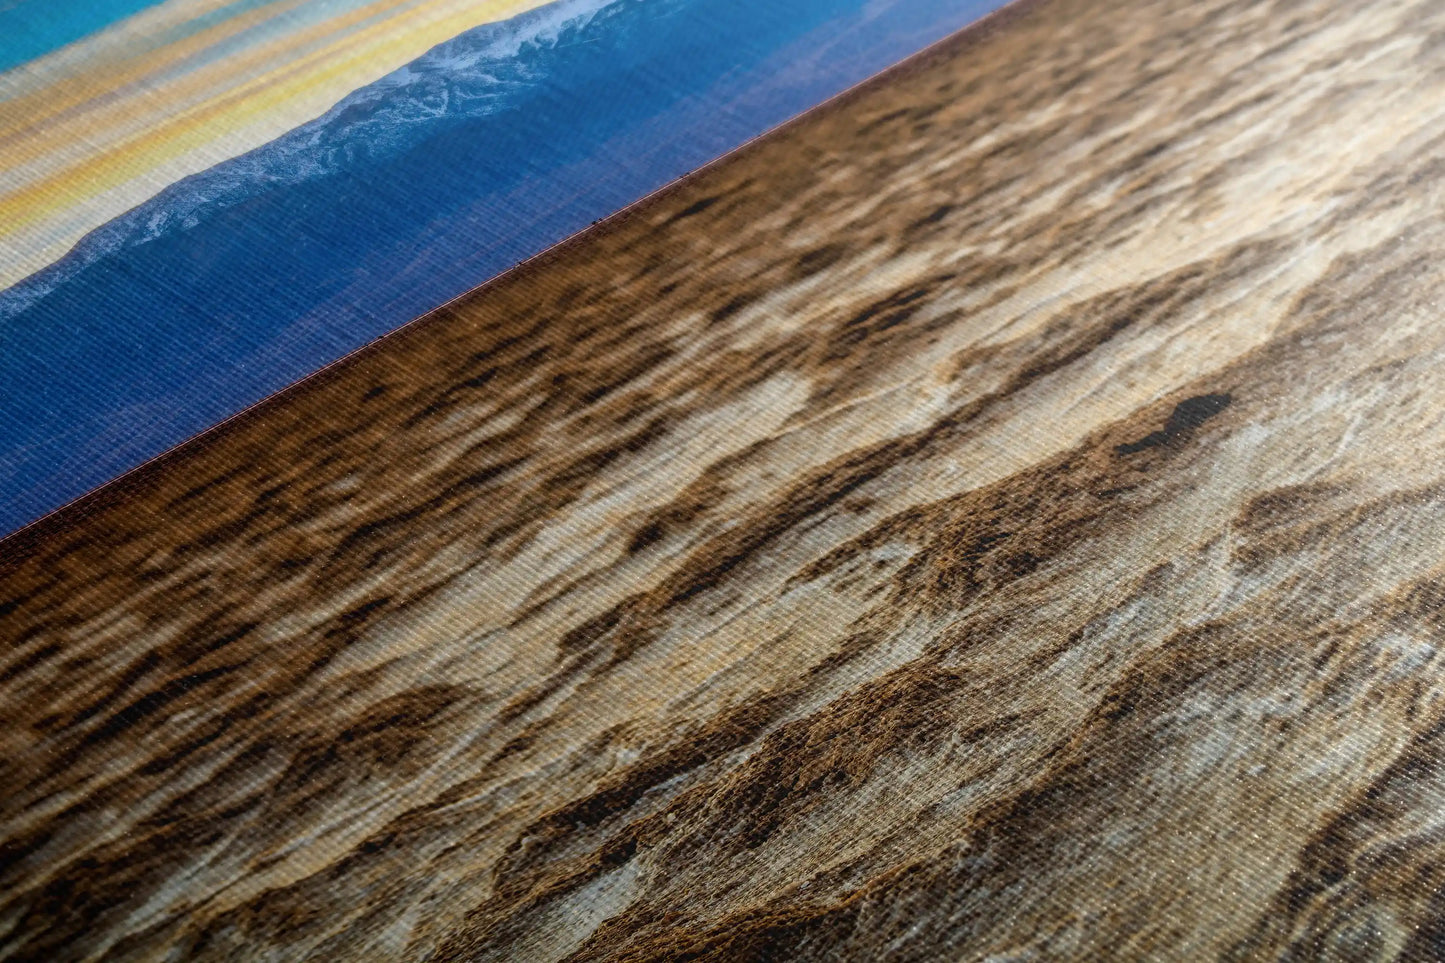 Texture-focused close-up of a canvas print, showing the detailed surface of Death Valley's Badwater Basin with a sunset backdrop.